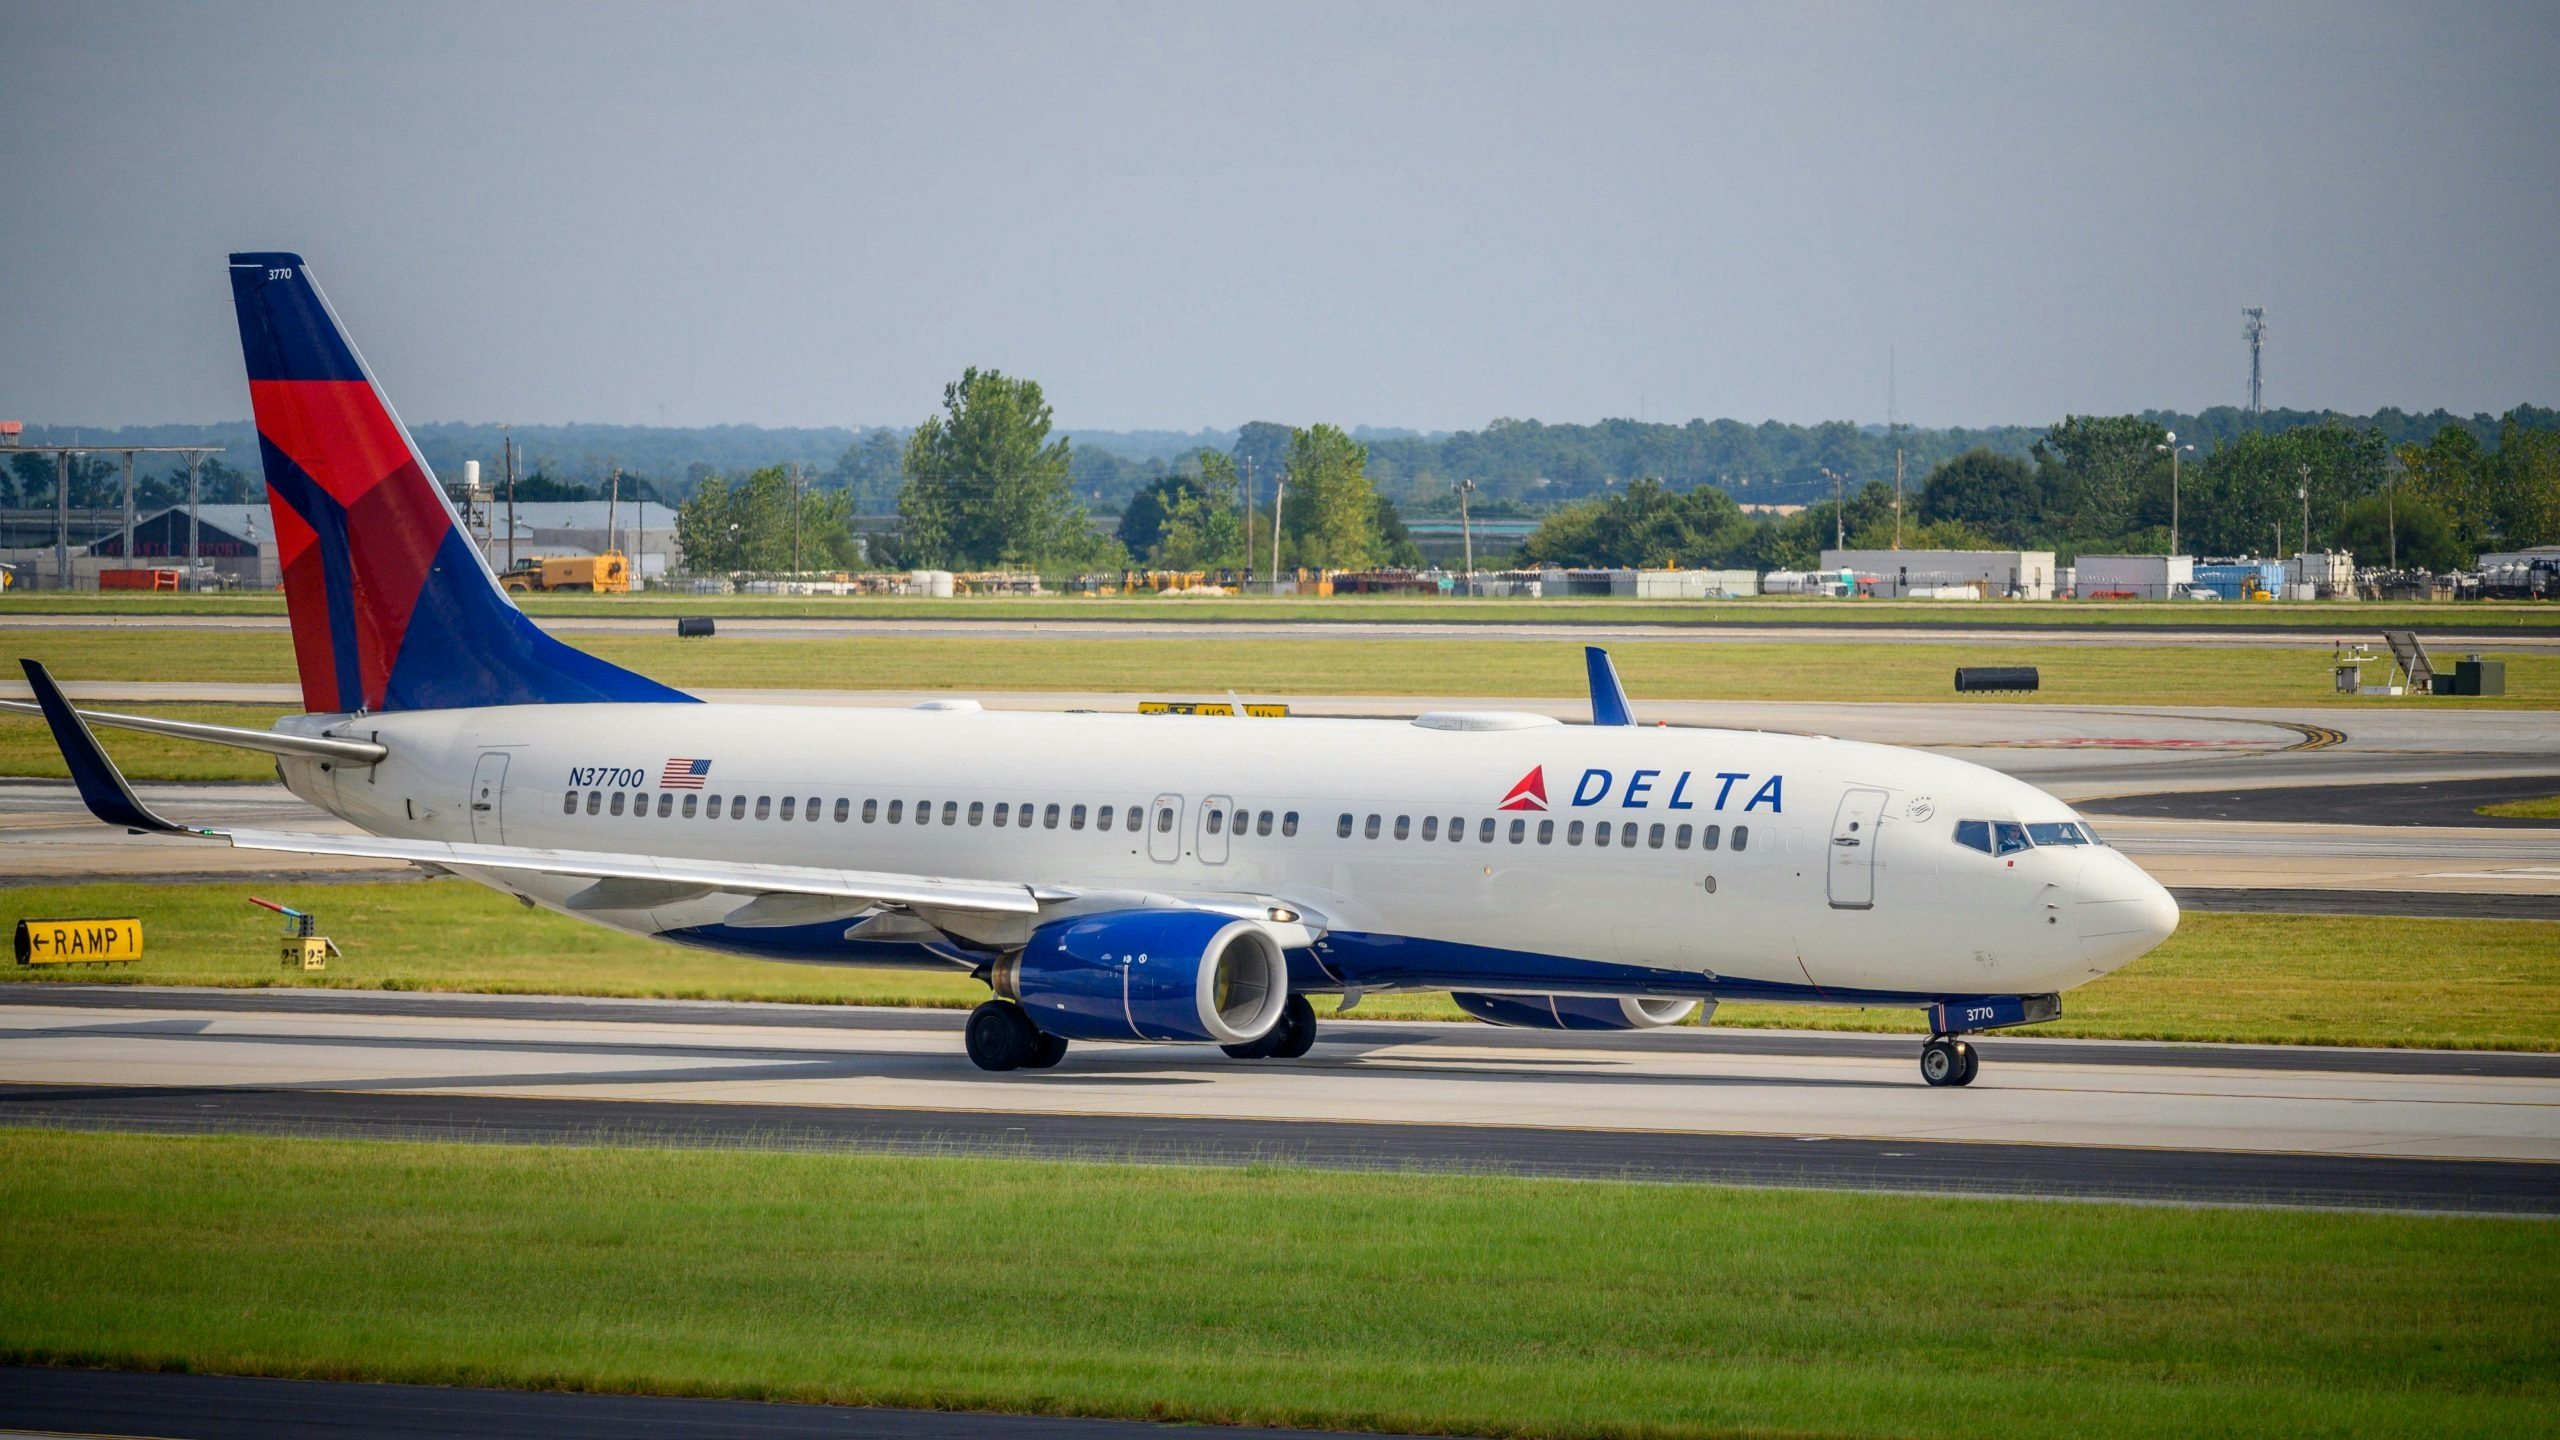 Delta Air Lines sparked outrage after announcing a major overhaul of its loyalty program. When clients feel that they are not loved, a breakup is imminent. Photo: Shutterstock